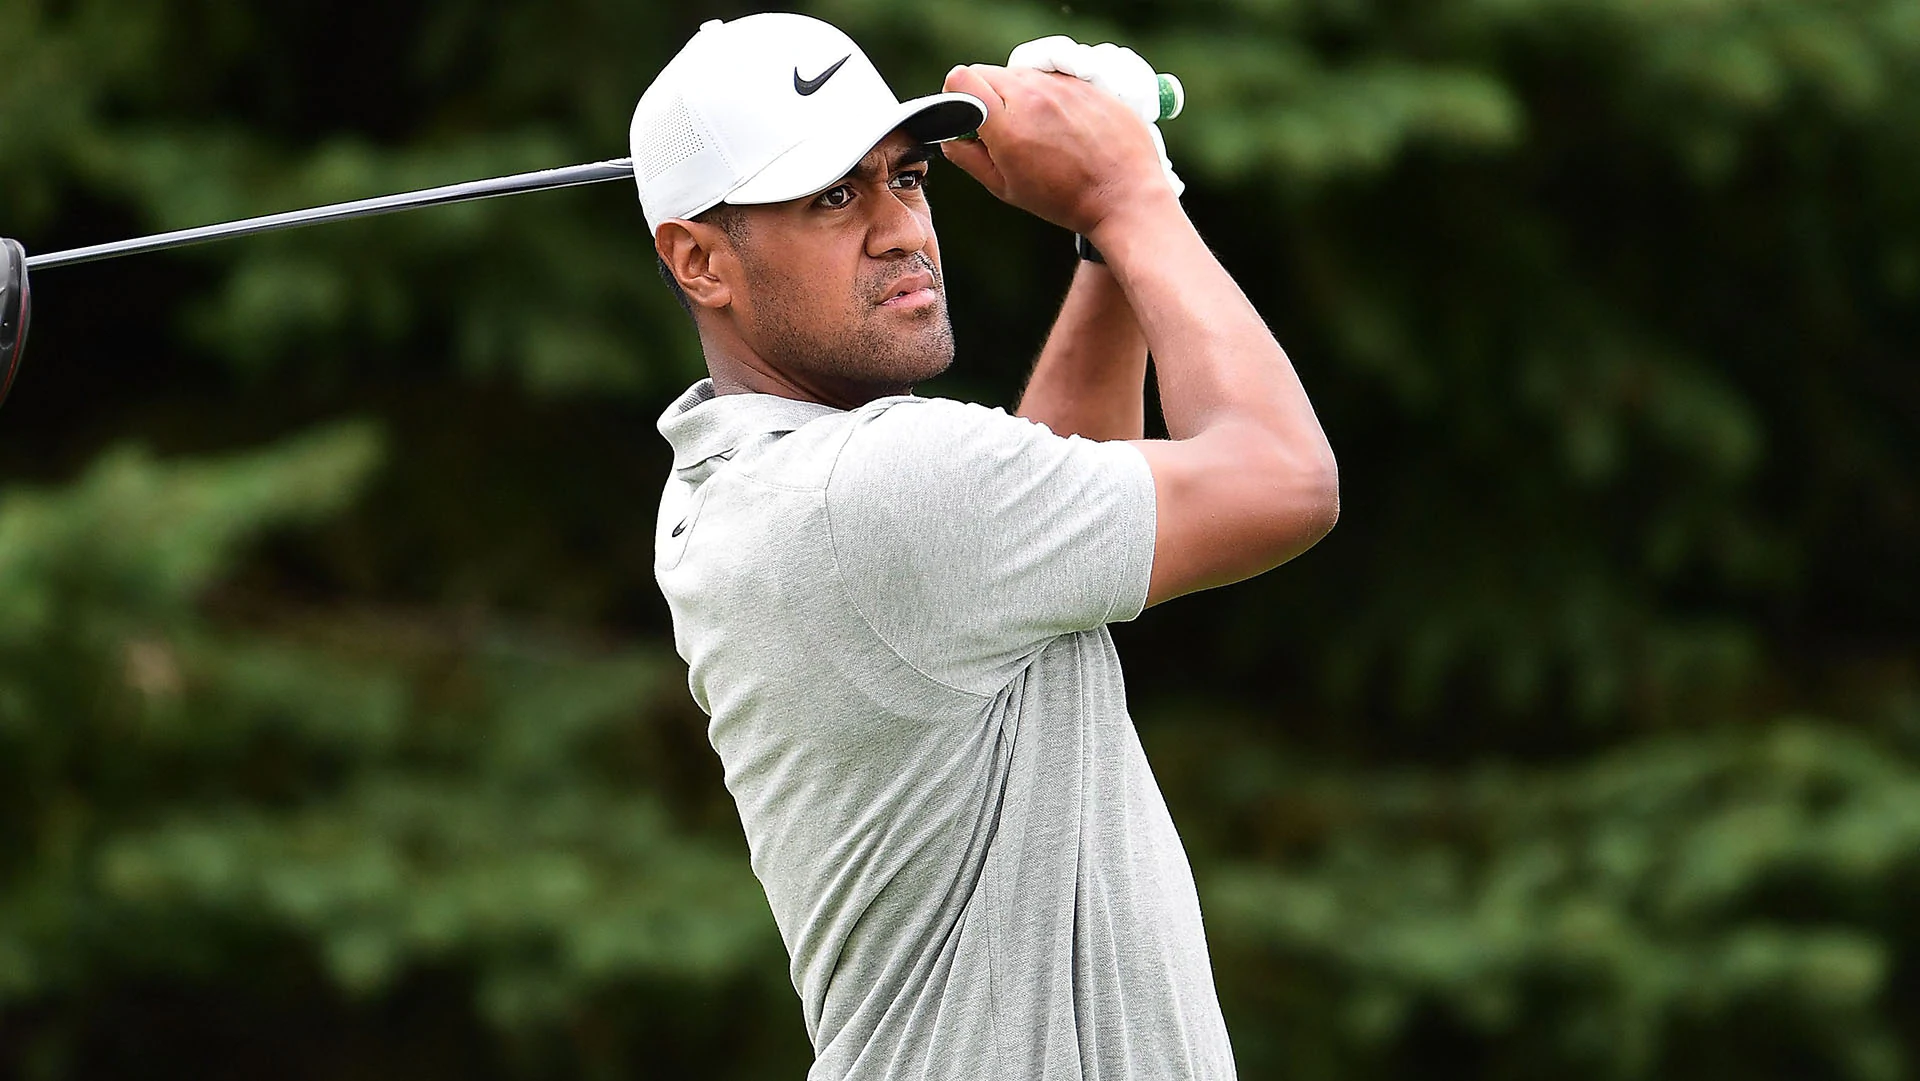 Tony Finau tabs new caddie, but not brother, for this week’s WGC event in Memphis